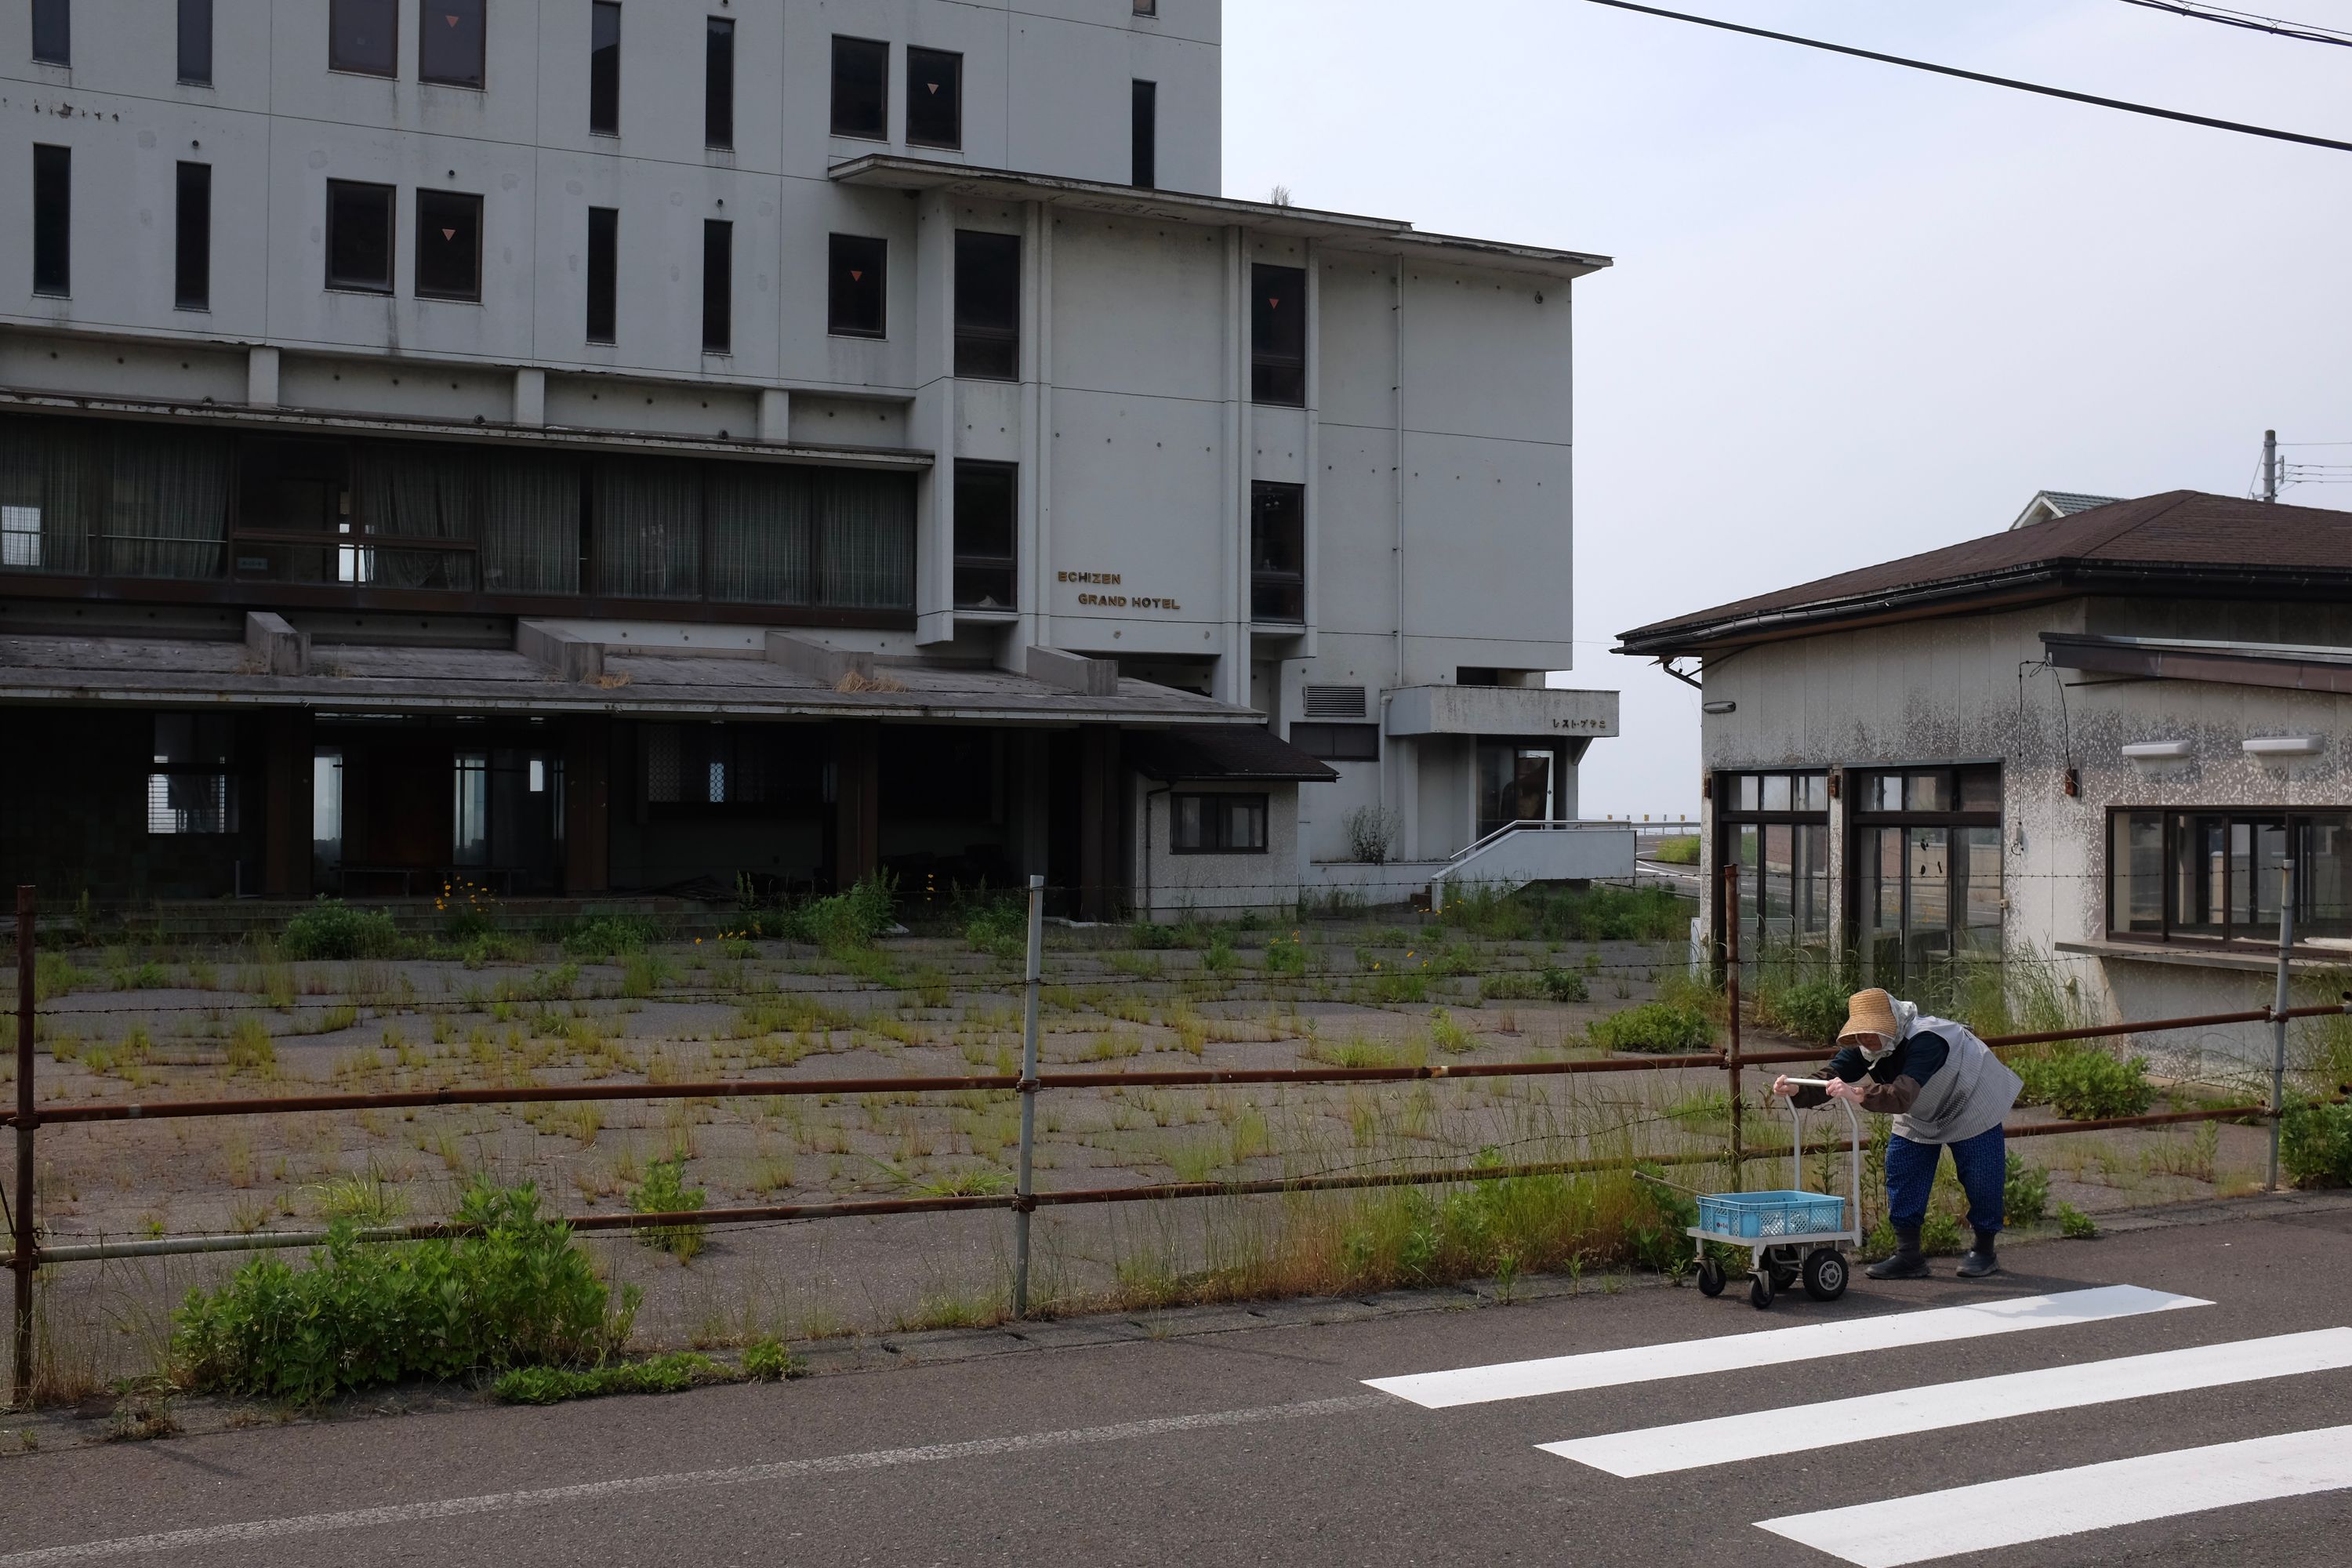 An old woman pushes a wheeled walker in front of an abandoned building marked “Echizen Grand Hotel”.